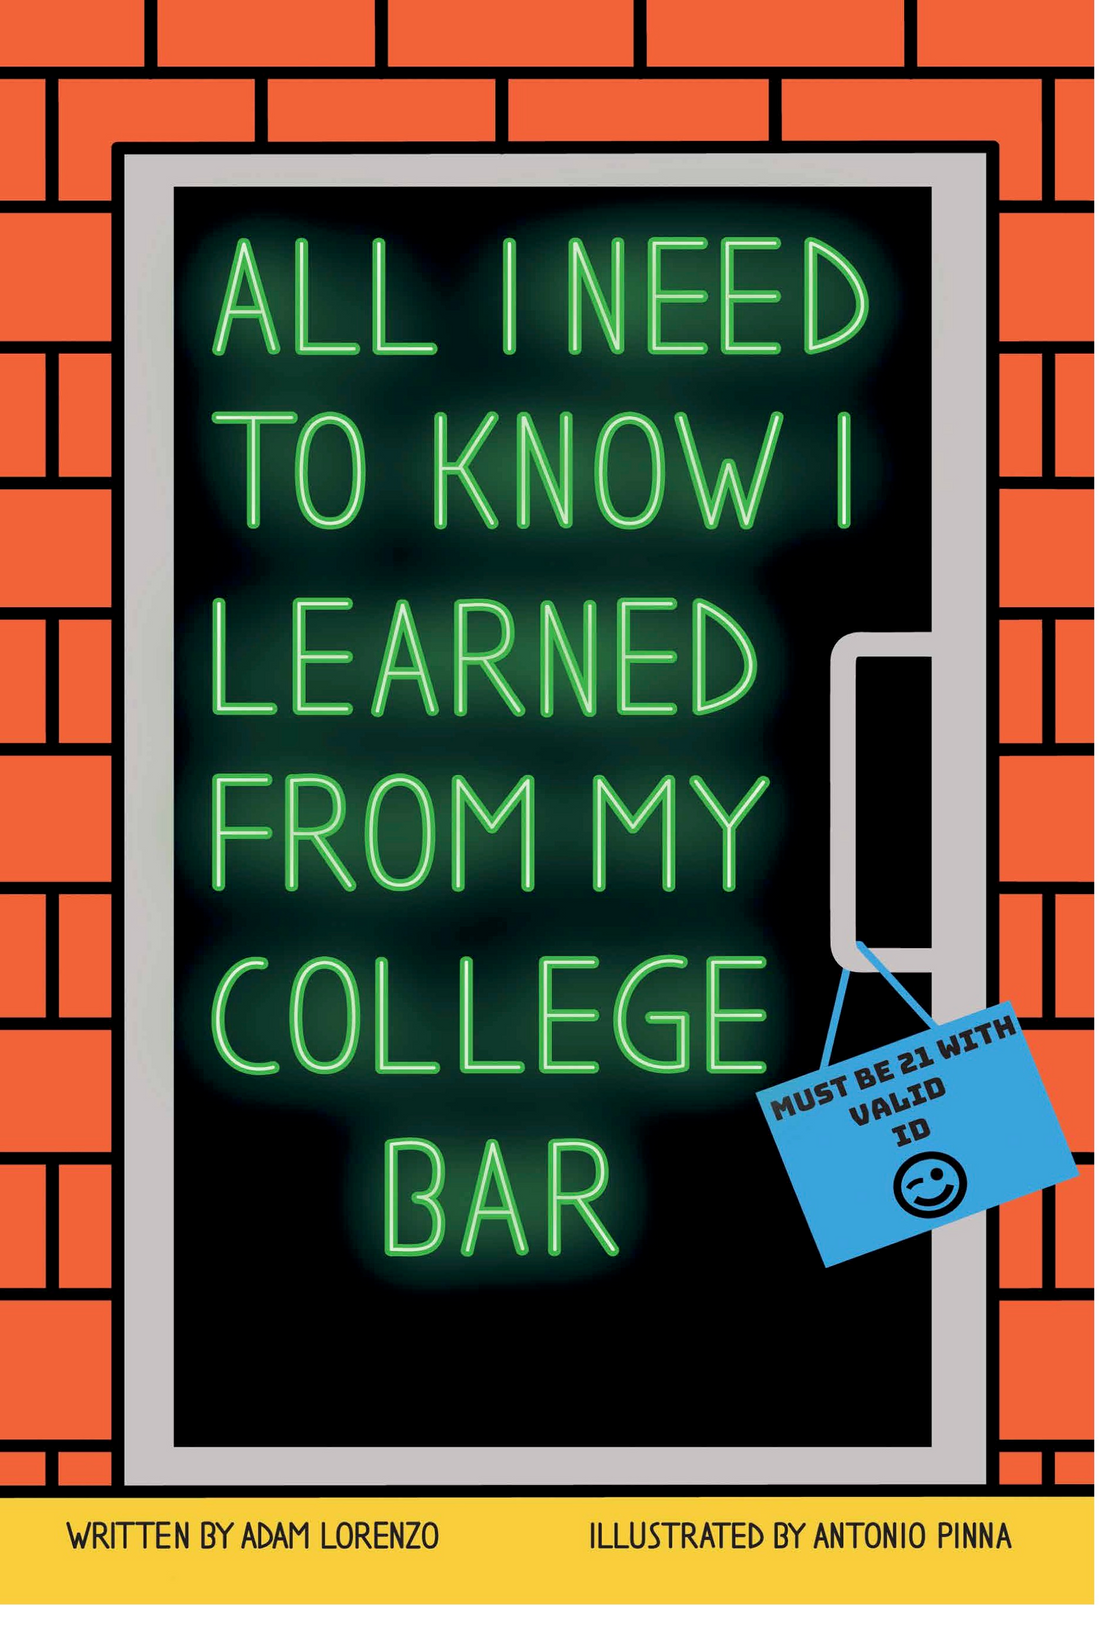 The #1 Bestselling Humor-Essay Book "All I Need To Know I Learned From My College Bar"